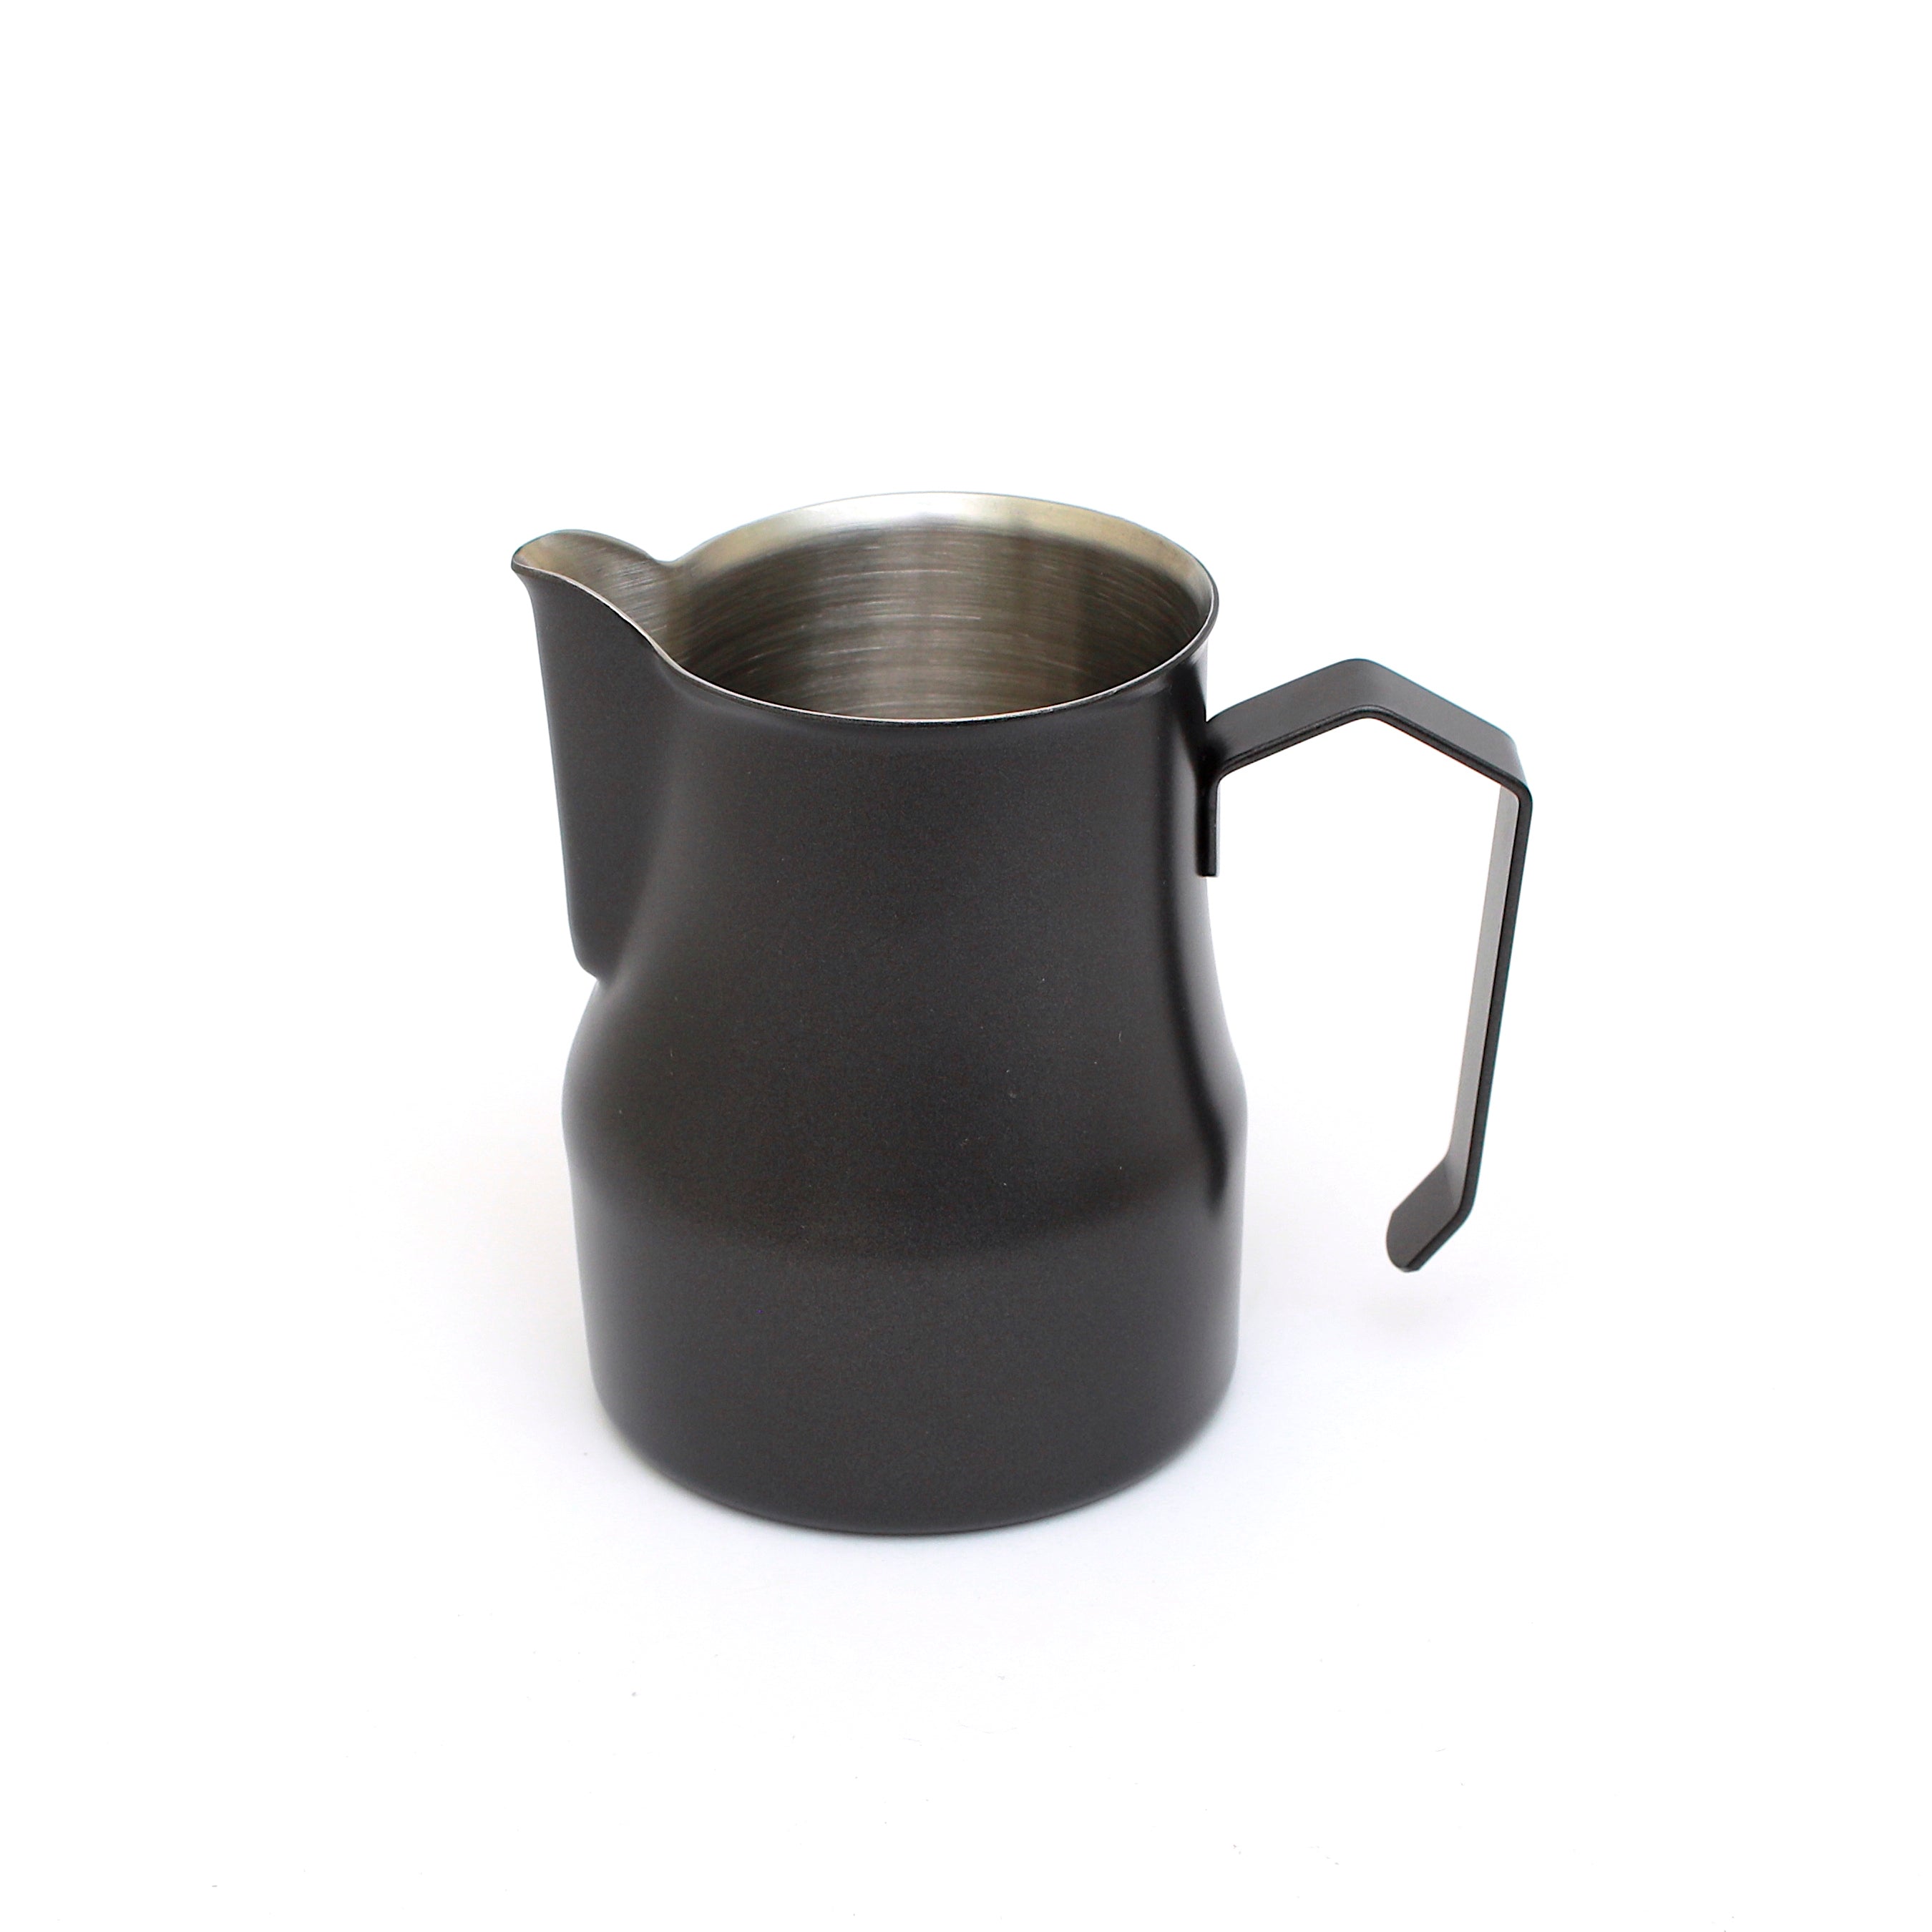 Stainless Steel Frothing Milk Jug For Espresso Drinks